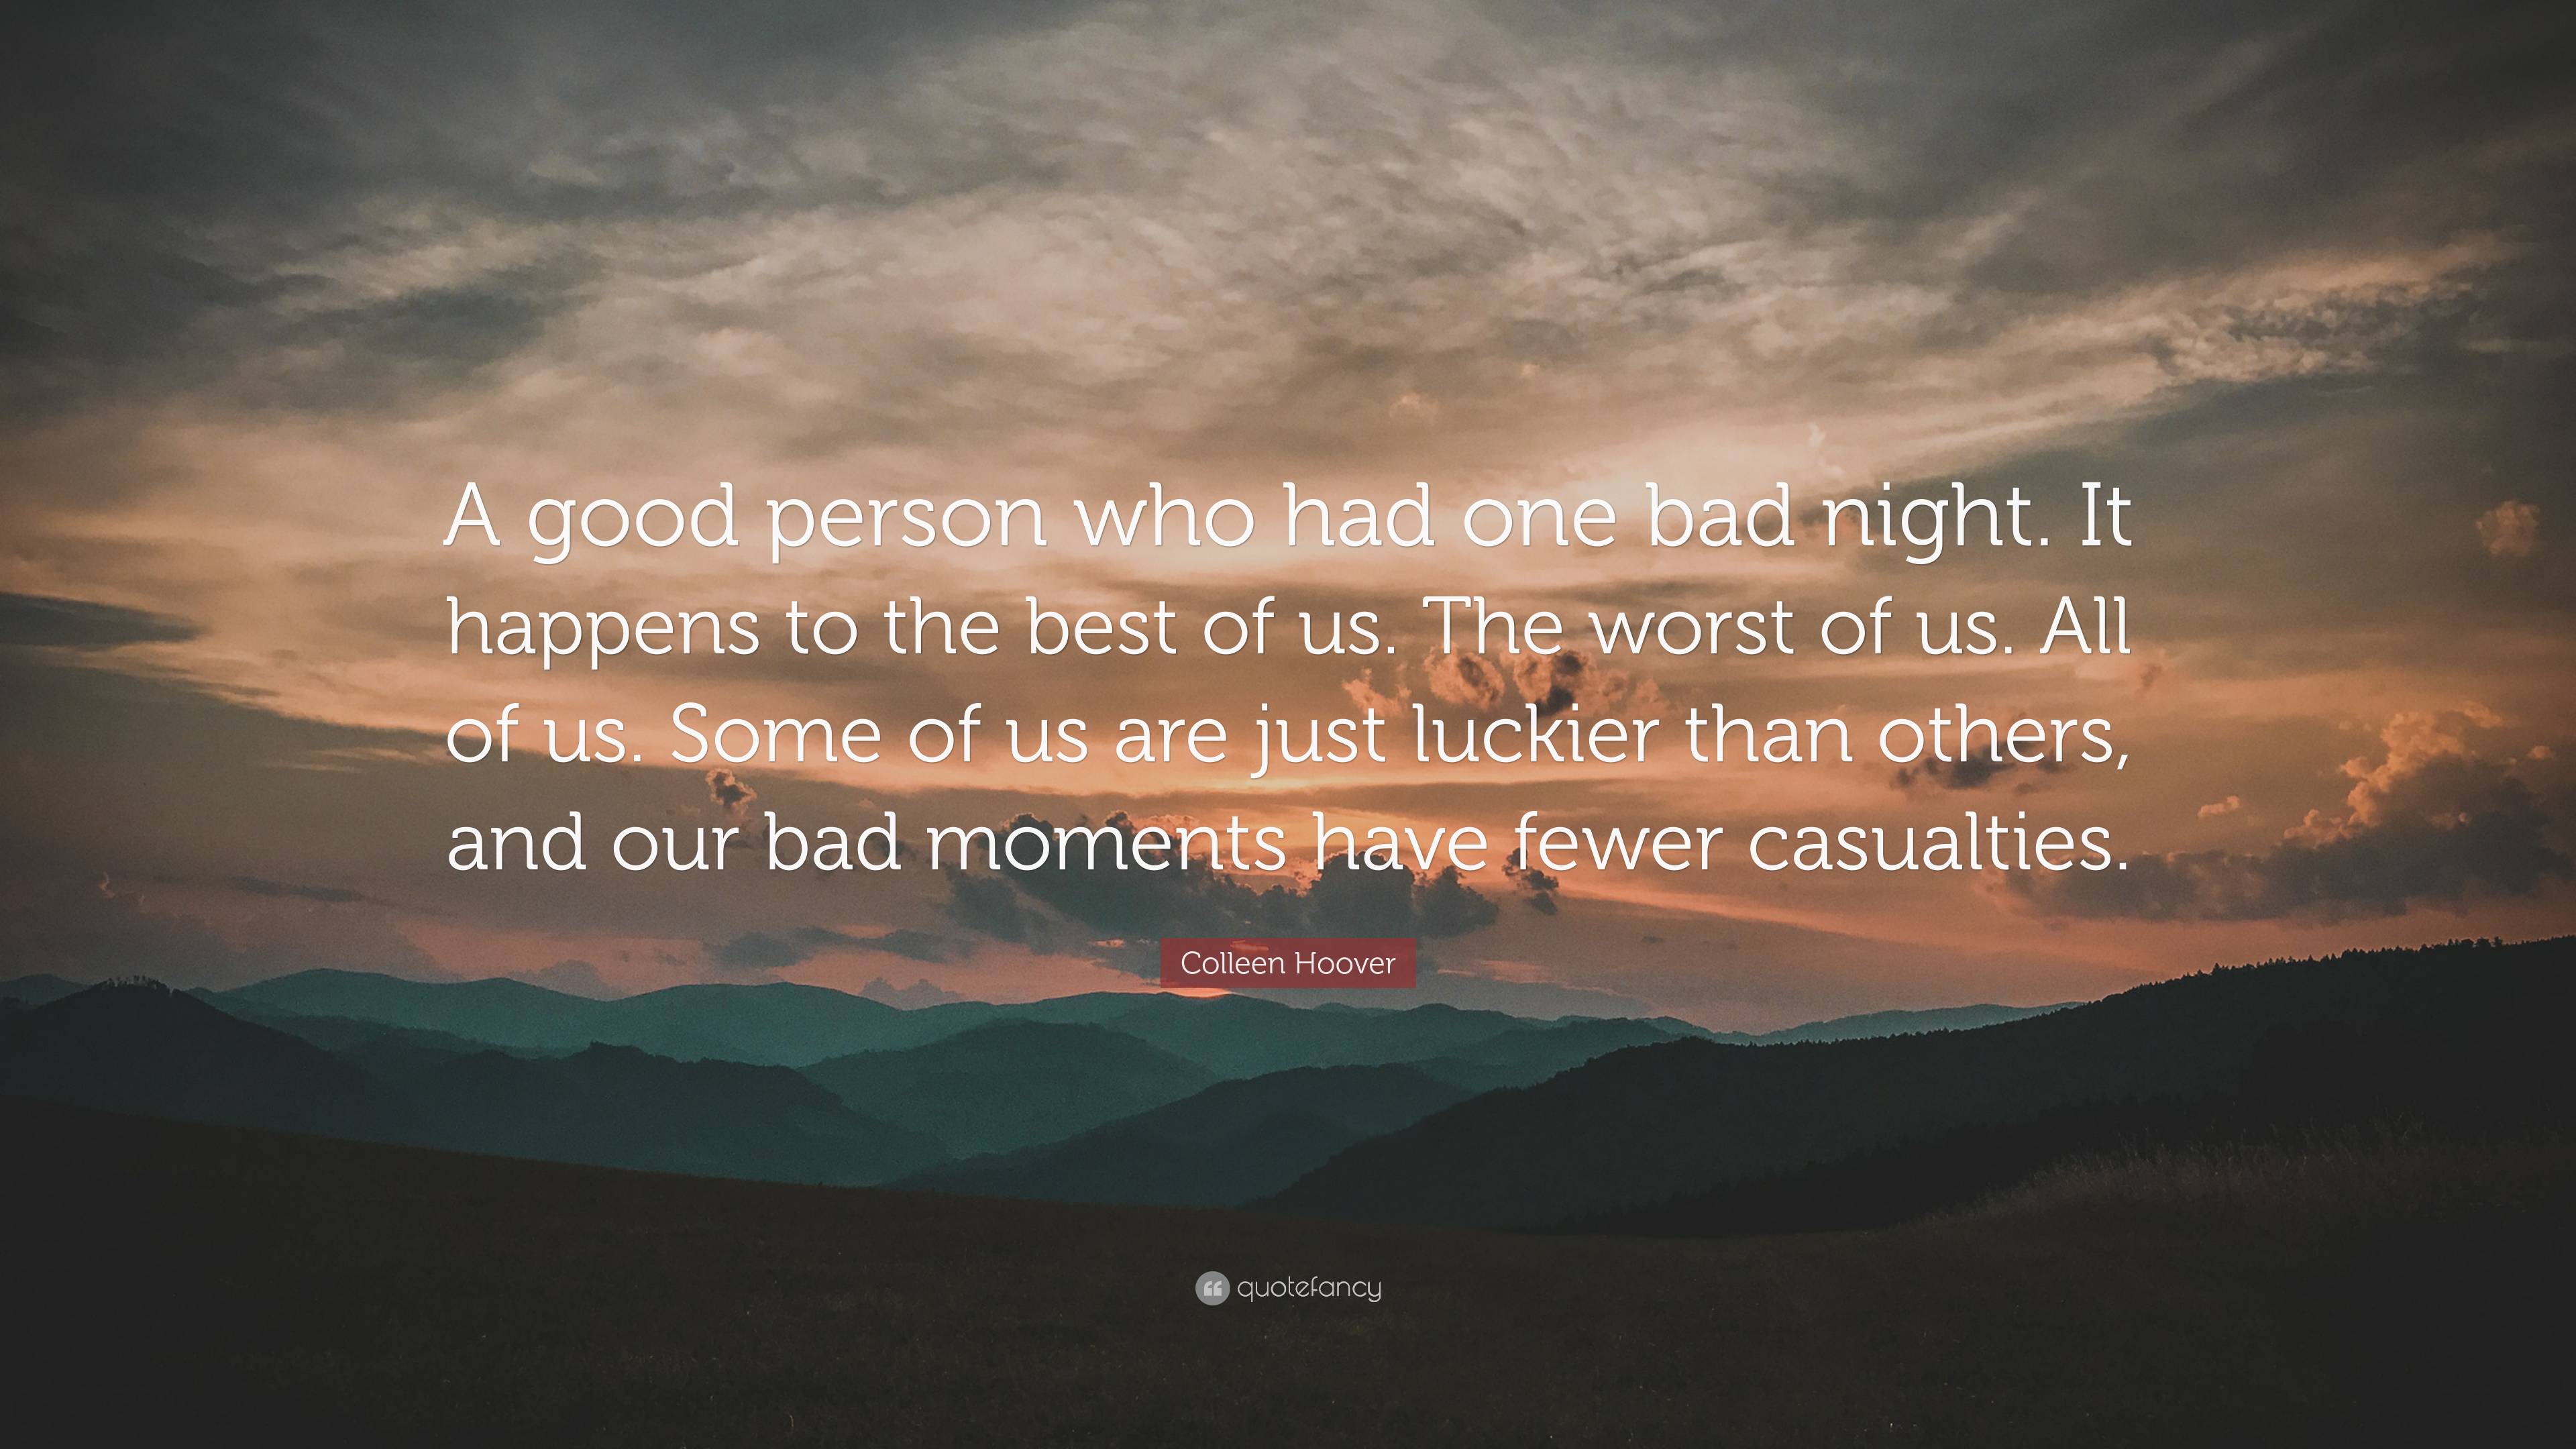 Colleen Hoover Quote: “A good person who had one bad night. It happens to  the best of us. The worst of us. All of us. Some of us are just lucki”